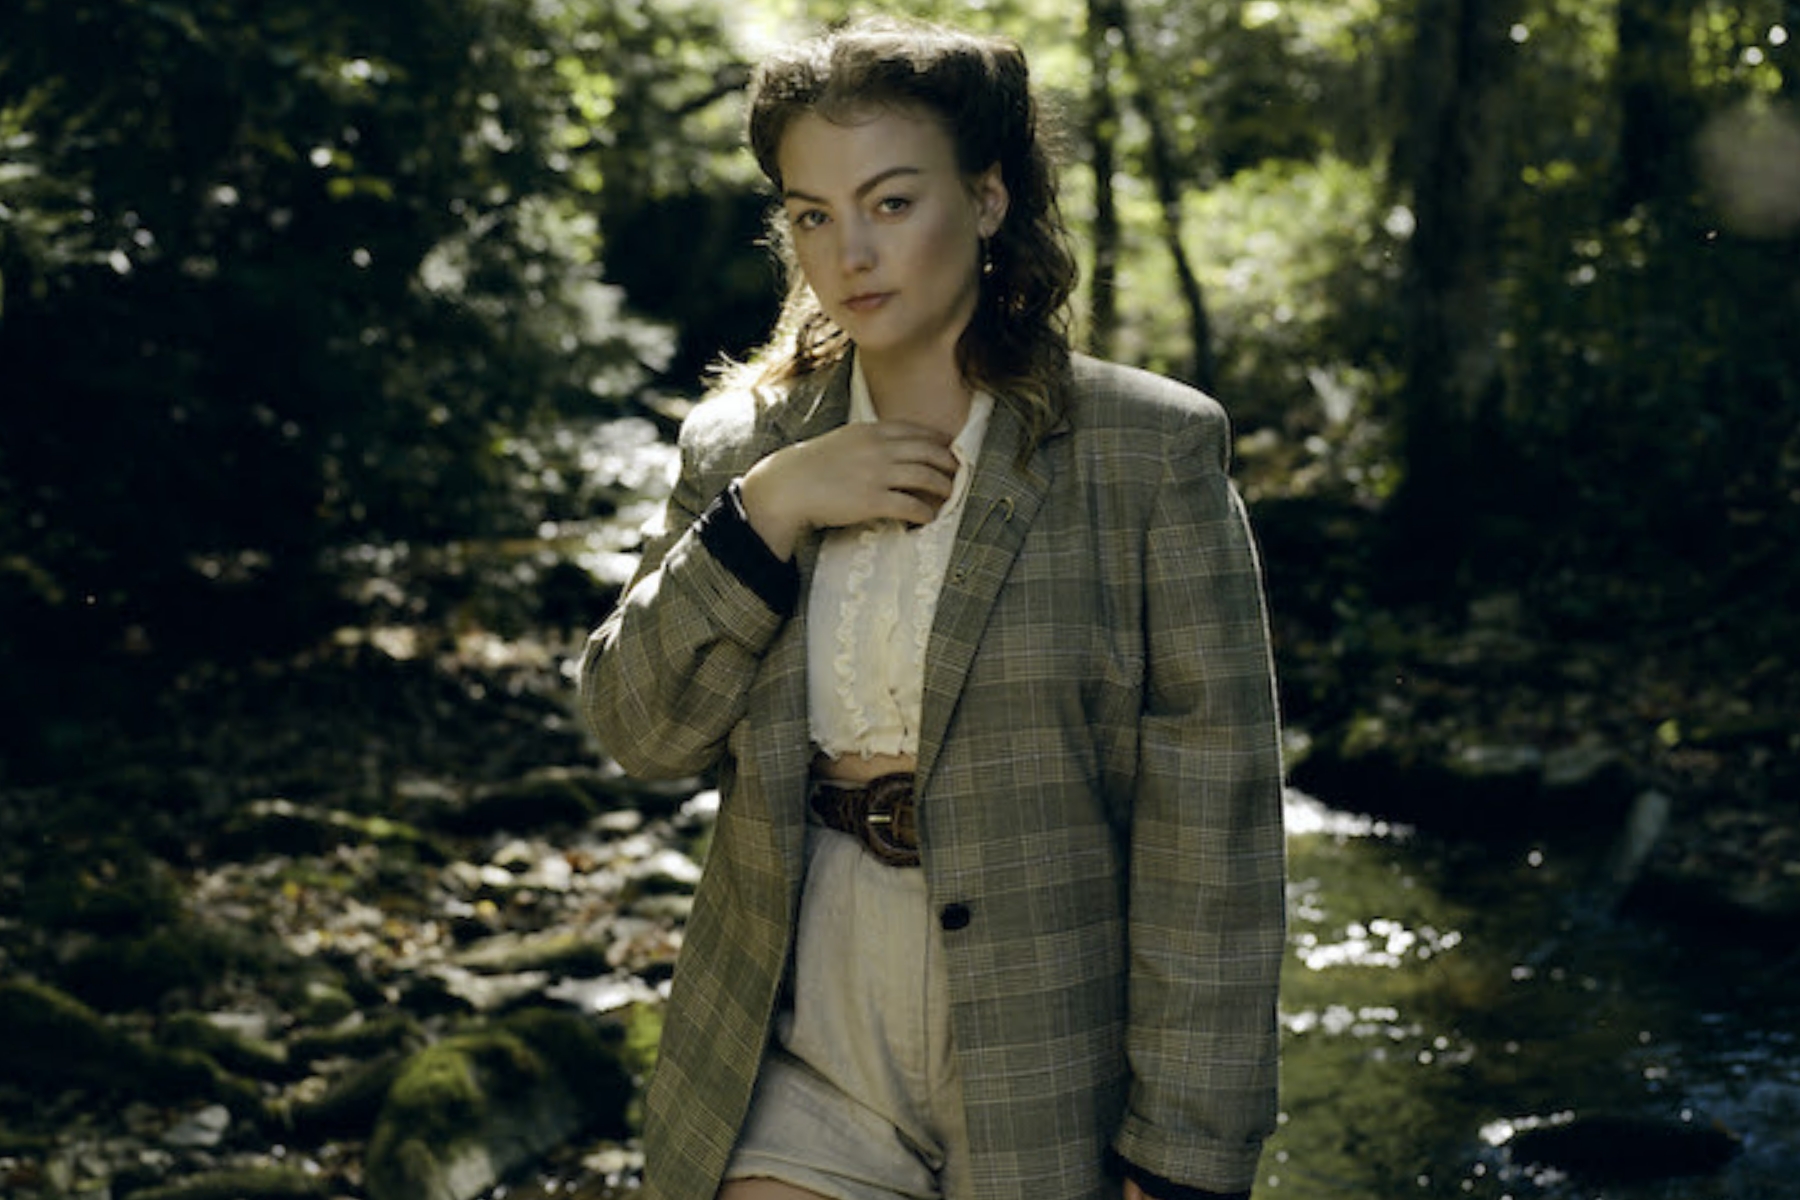 NEWS: Angel Olsen announces details of new album 'Big Time' & Shares video for title track